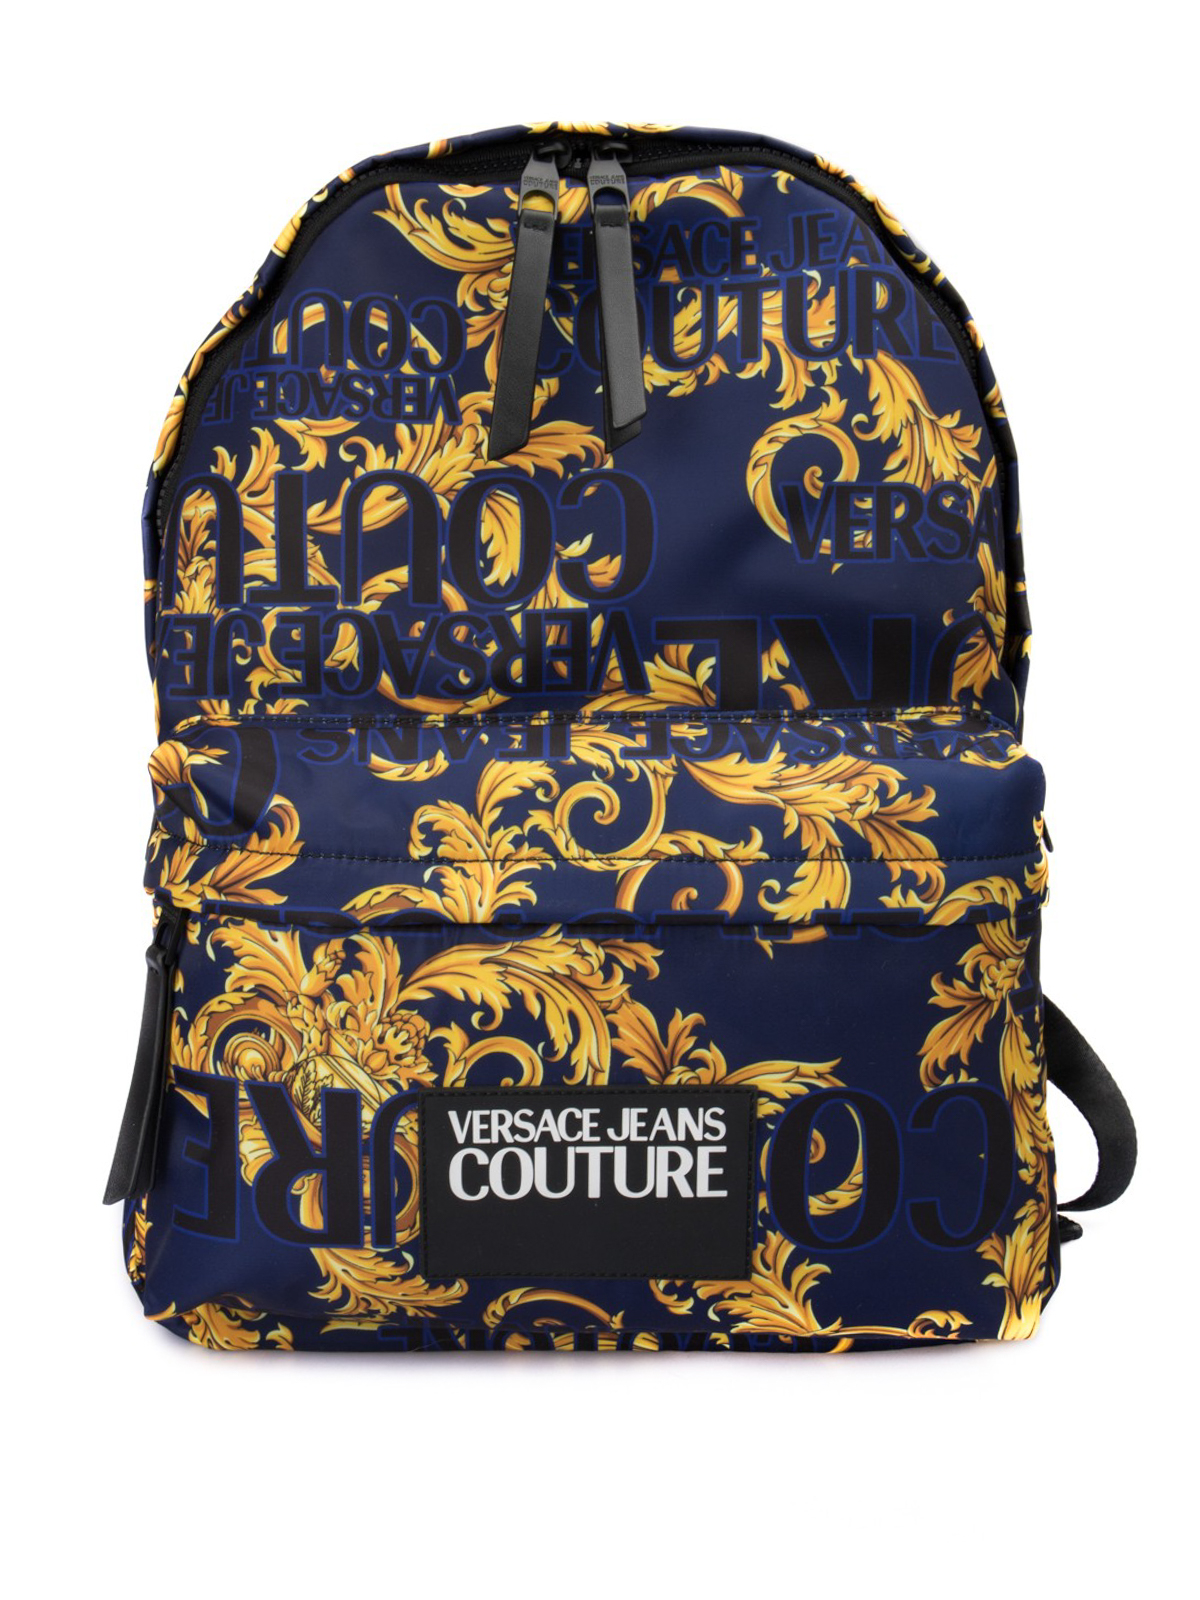 VERSACE JEANS COUTURE BAROQUE PRINT BACKPACK